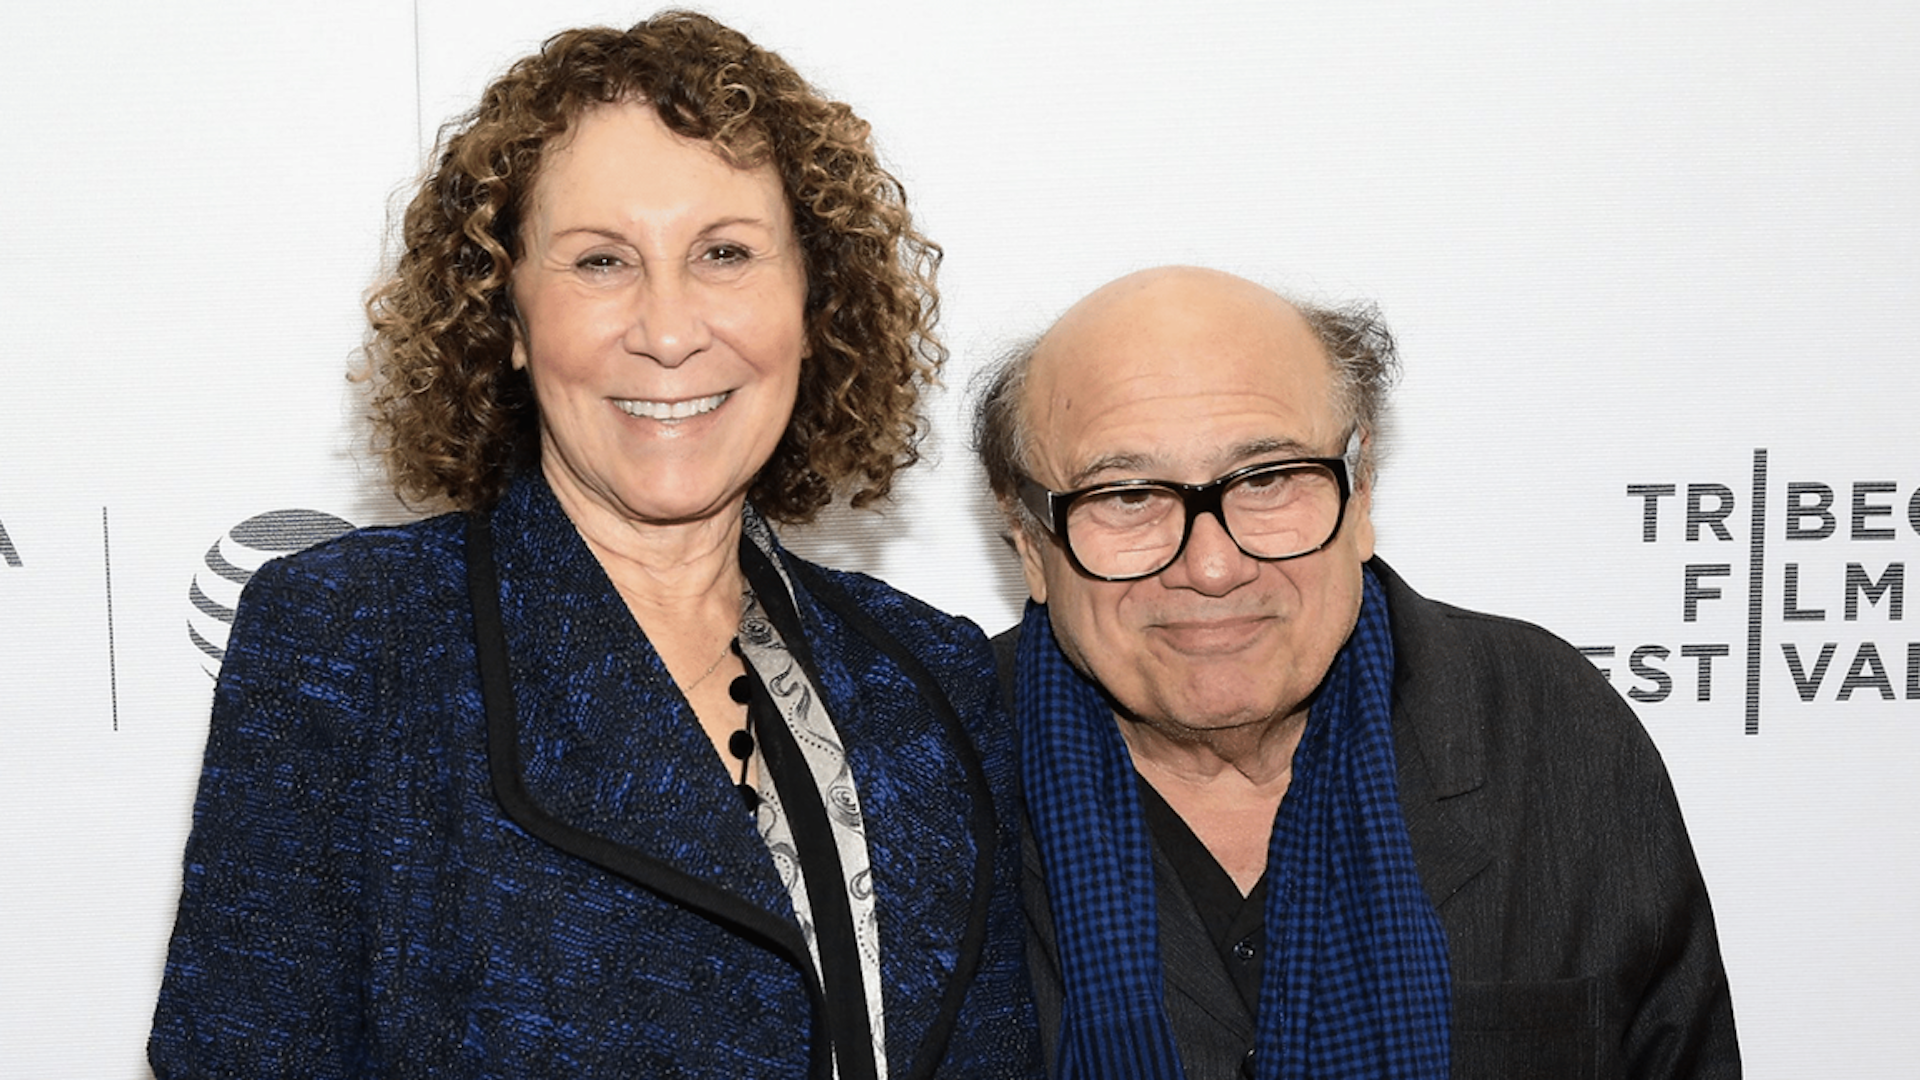 Rhea Perlman and Danny DeVito Prove Friendship and Love Can Survive Outside the Structure of Marriage